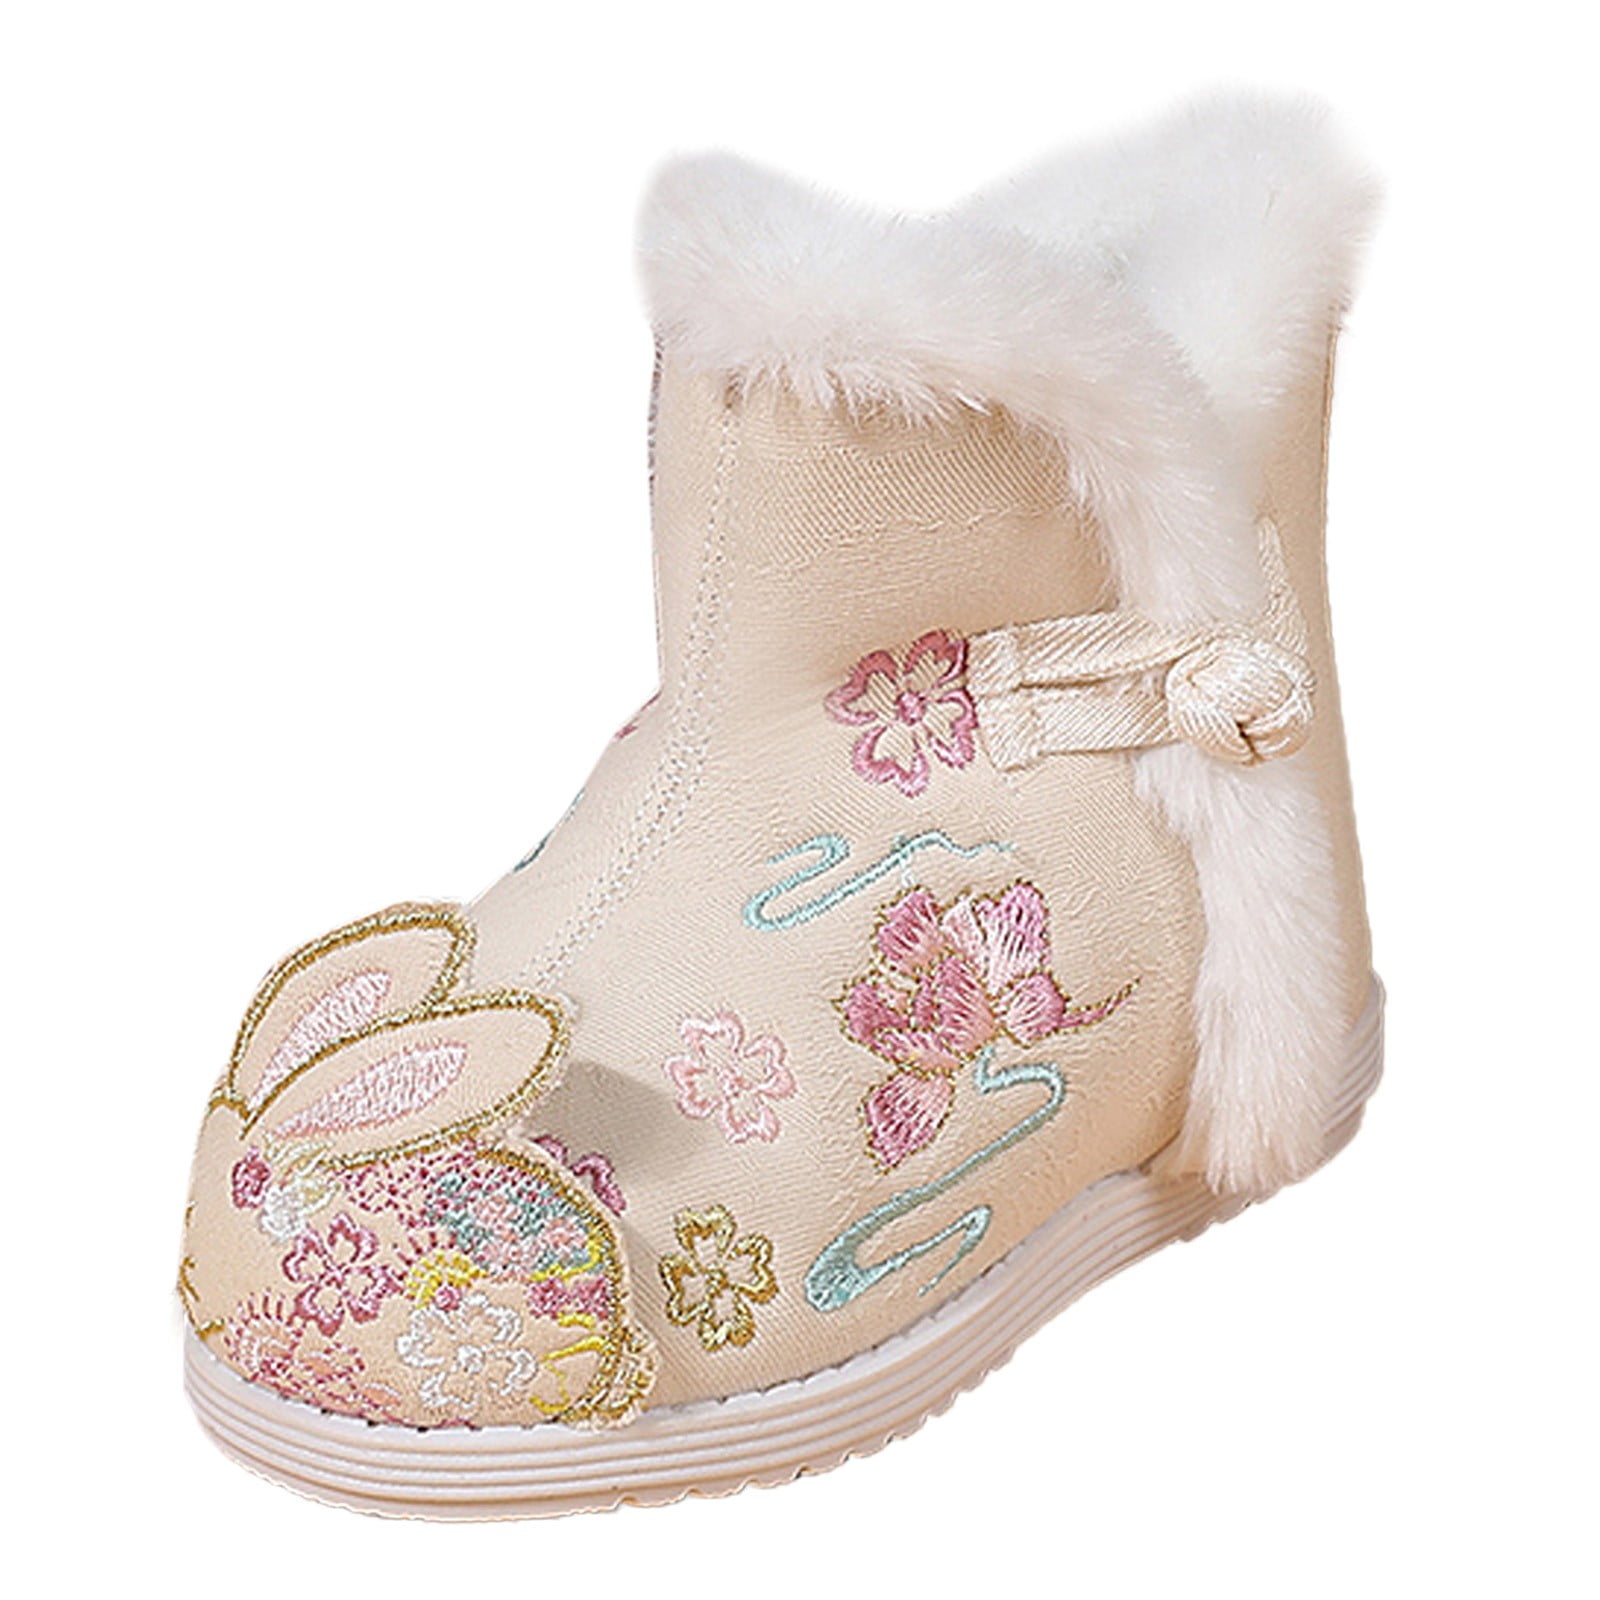 KaLI_store Winter Boots For Girls Kids Boots Fashion Girls, 44% OFF